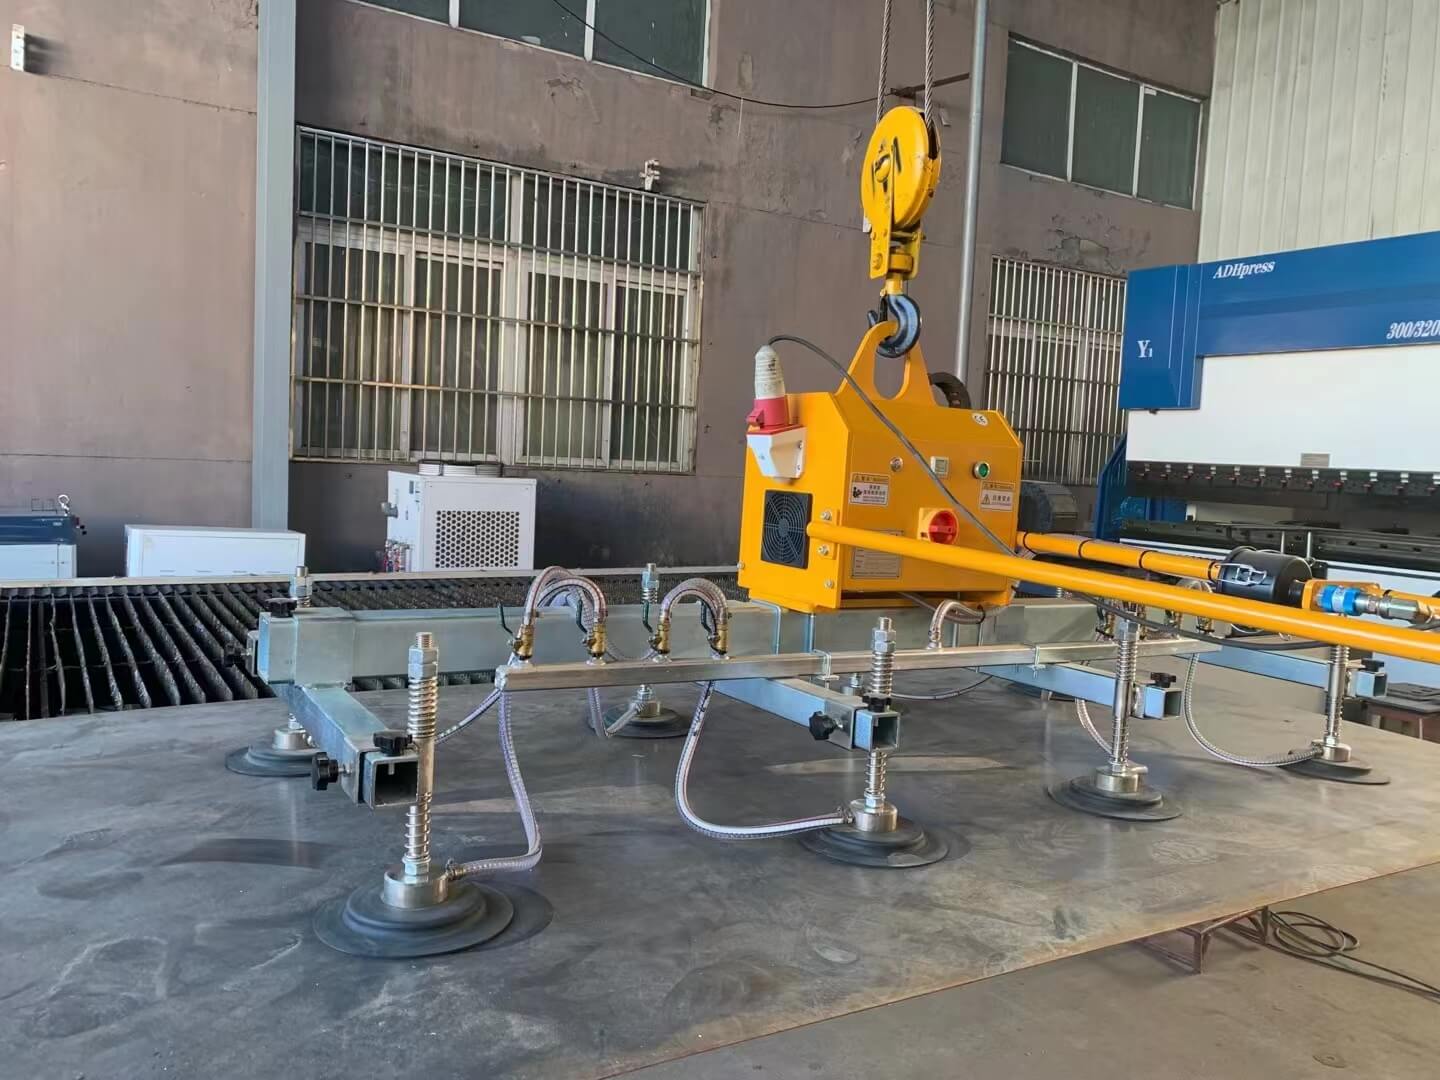 Vacuum lifter for metal sheets with an approximate weight of 400 kg made in china-2.jpg